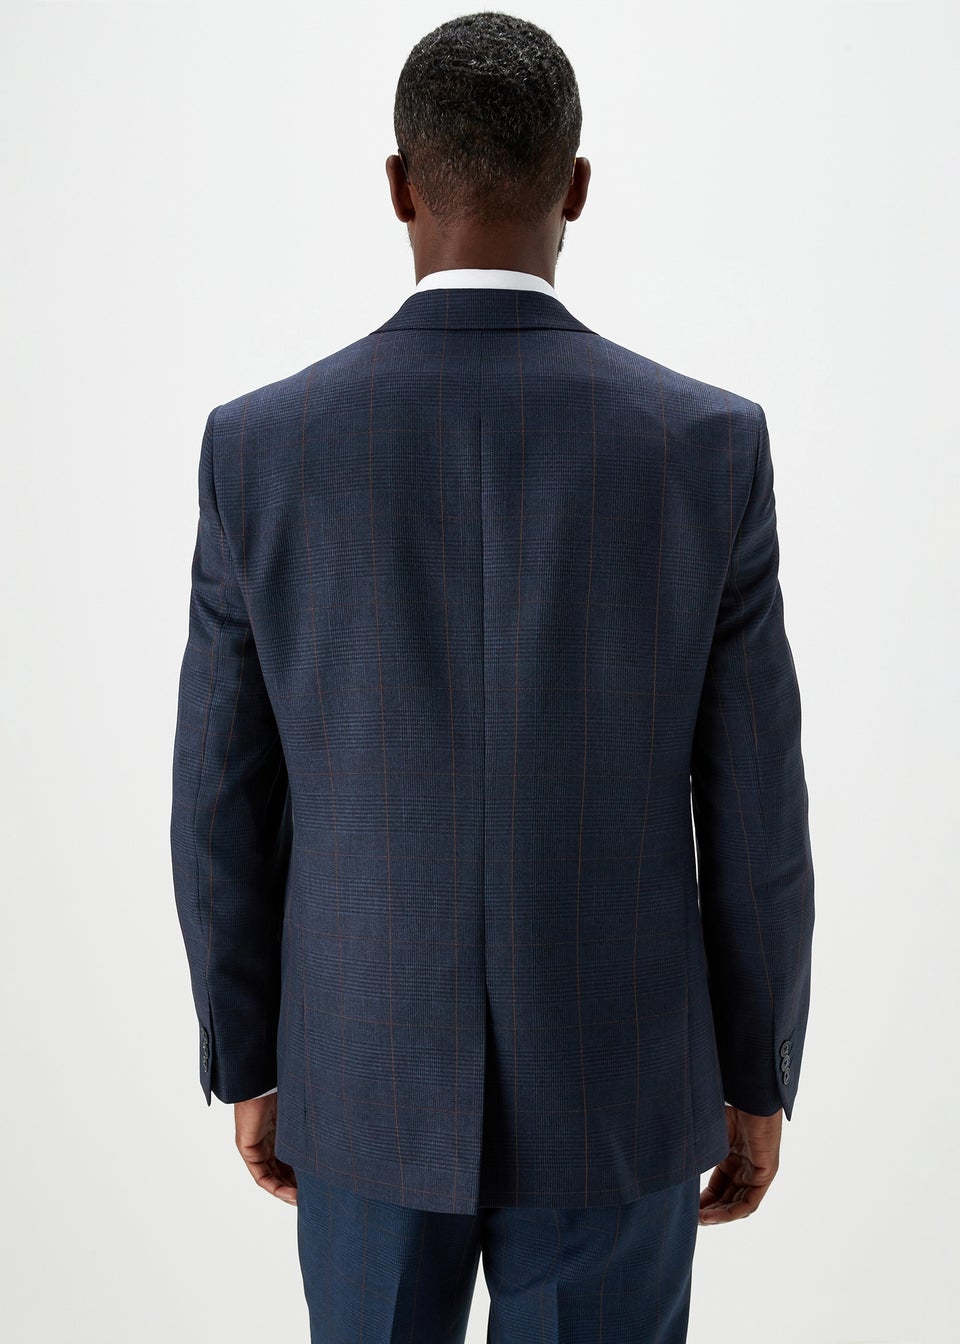 Taylor & Wright Westminster Navy Tailored Fit Suit Jacket